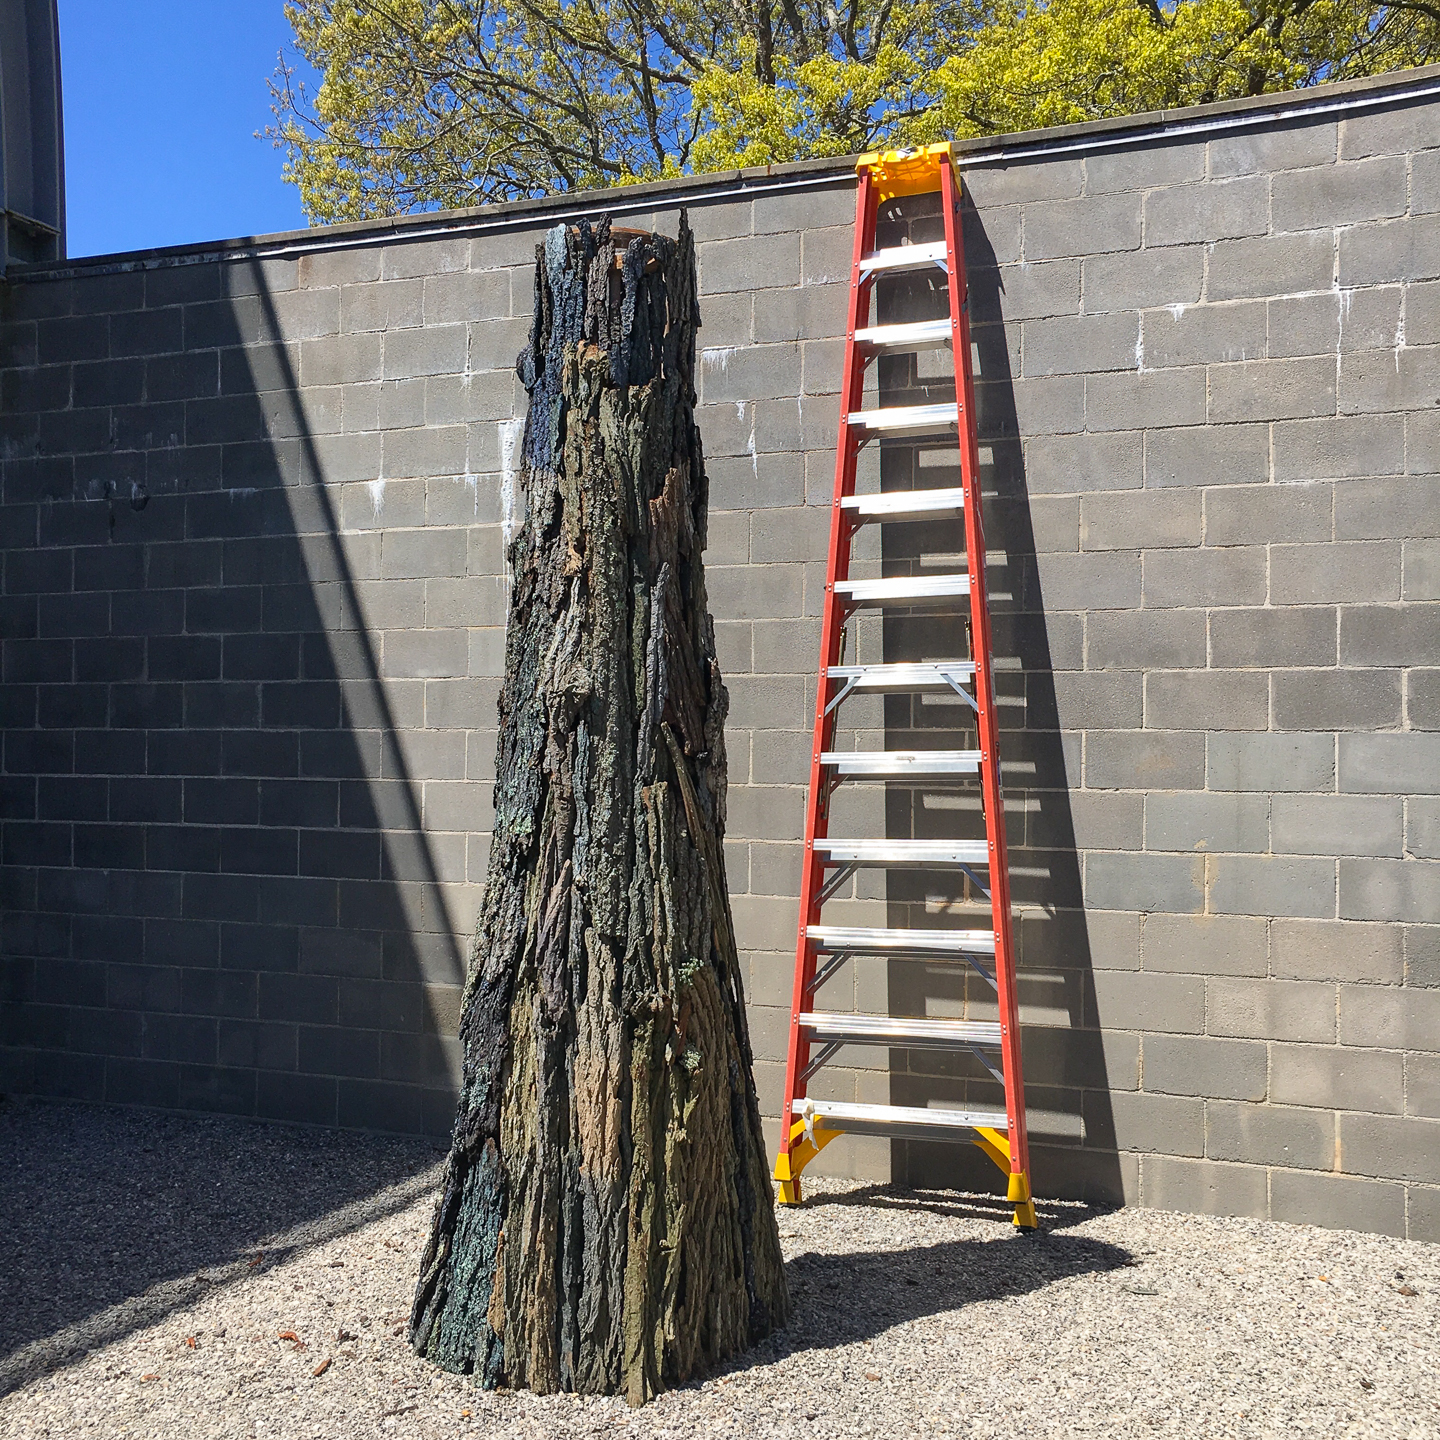 TREE, 2019 a residency and collaboration with Toni Ross and Laurie Lambrecht at Robert Wilson's WATERMILL CENTER, Water Mill, NY photo by Laurie Lambrecht